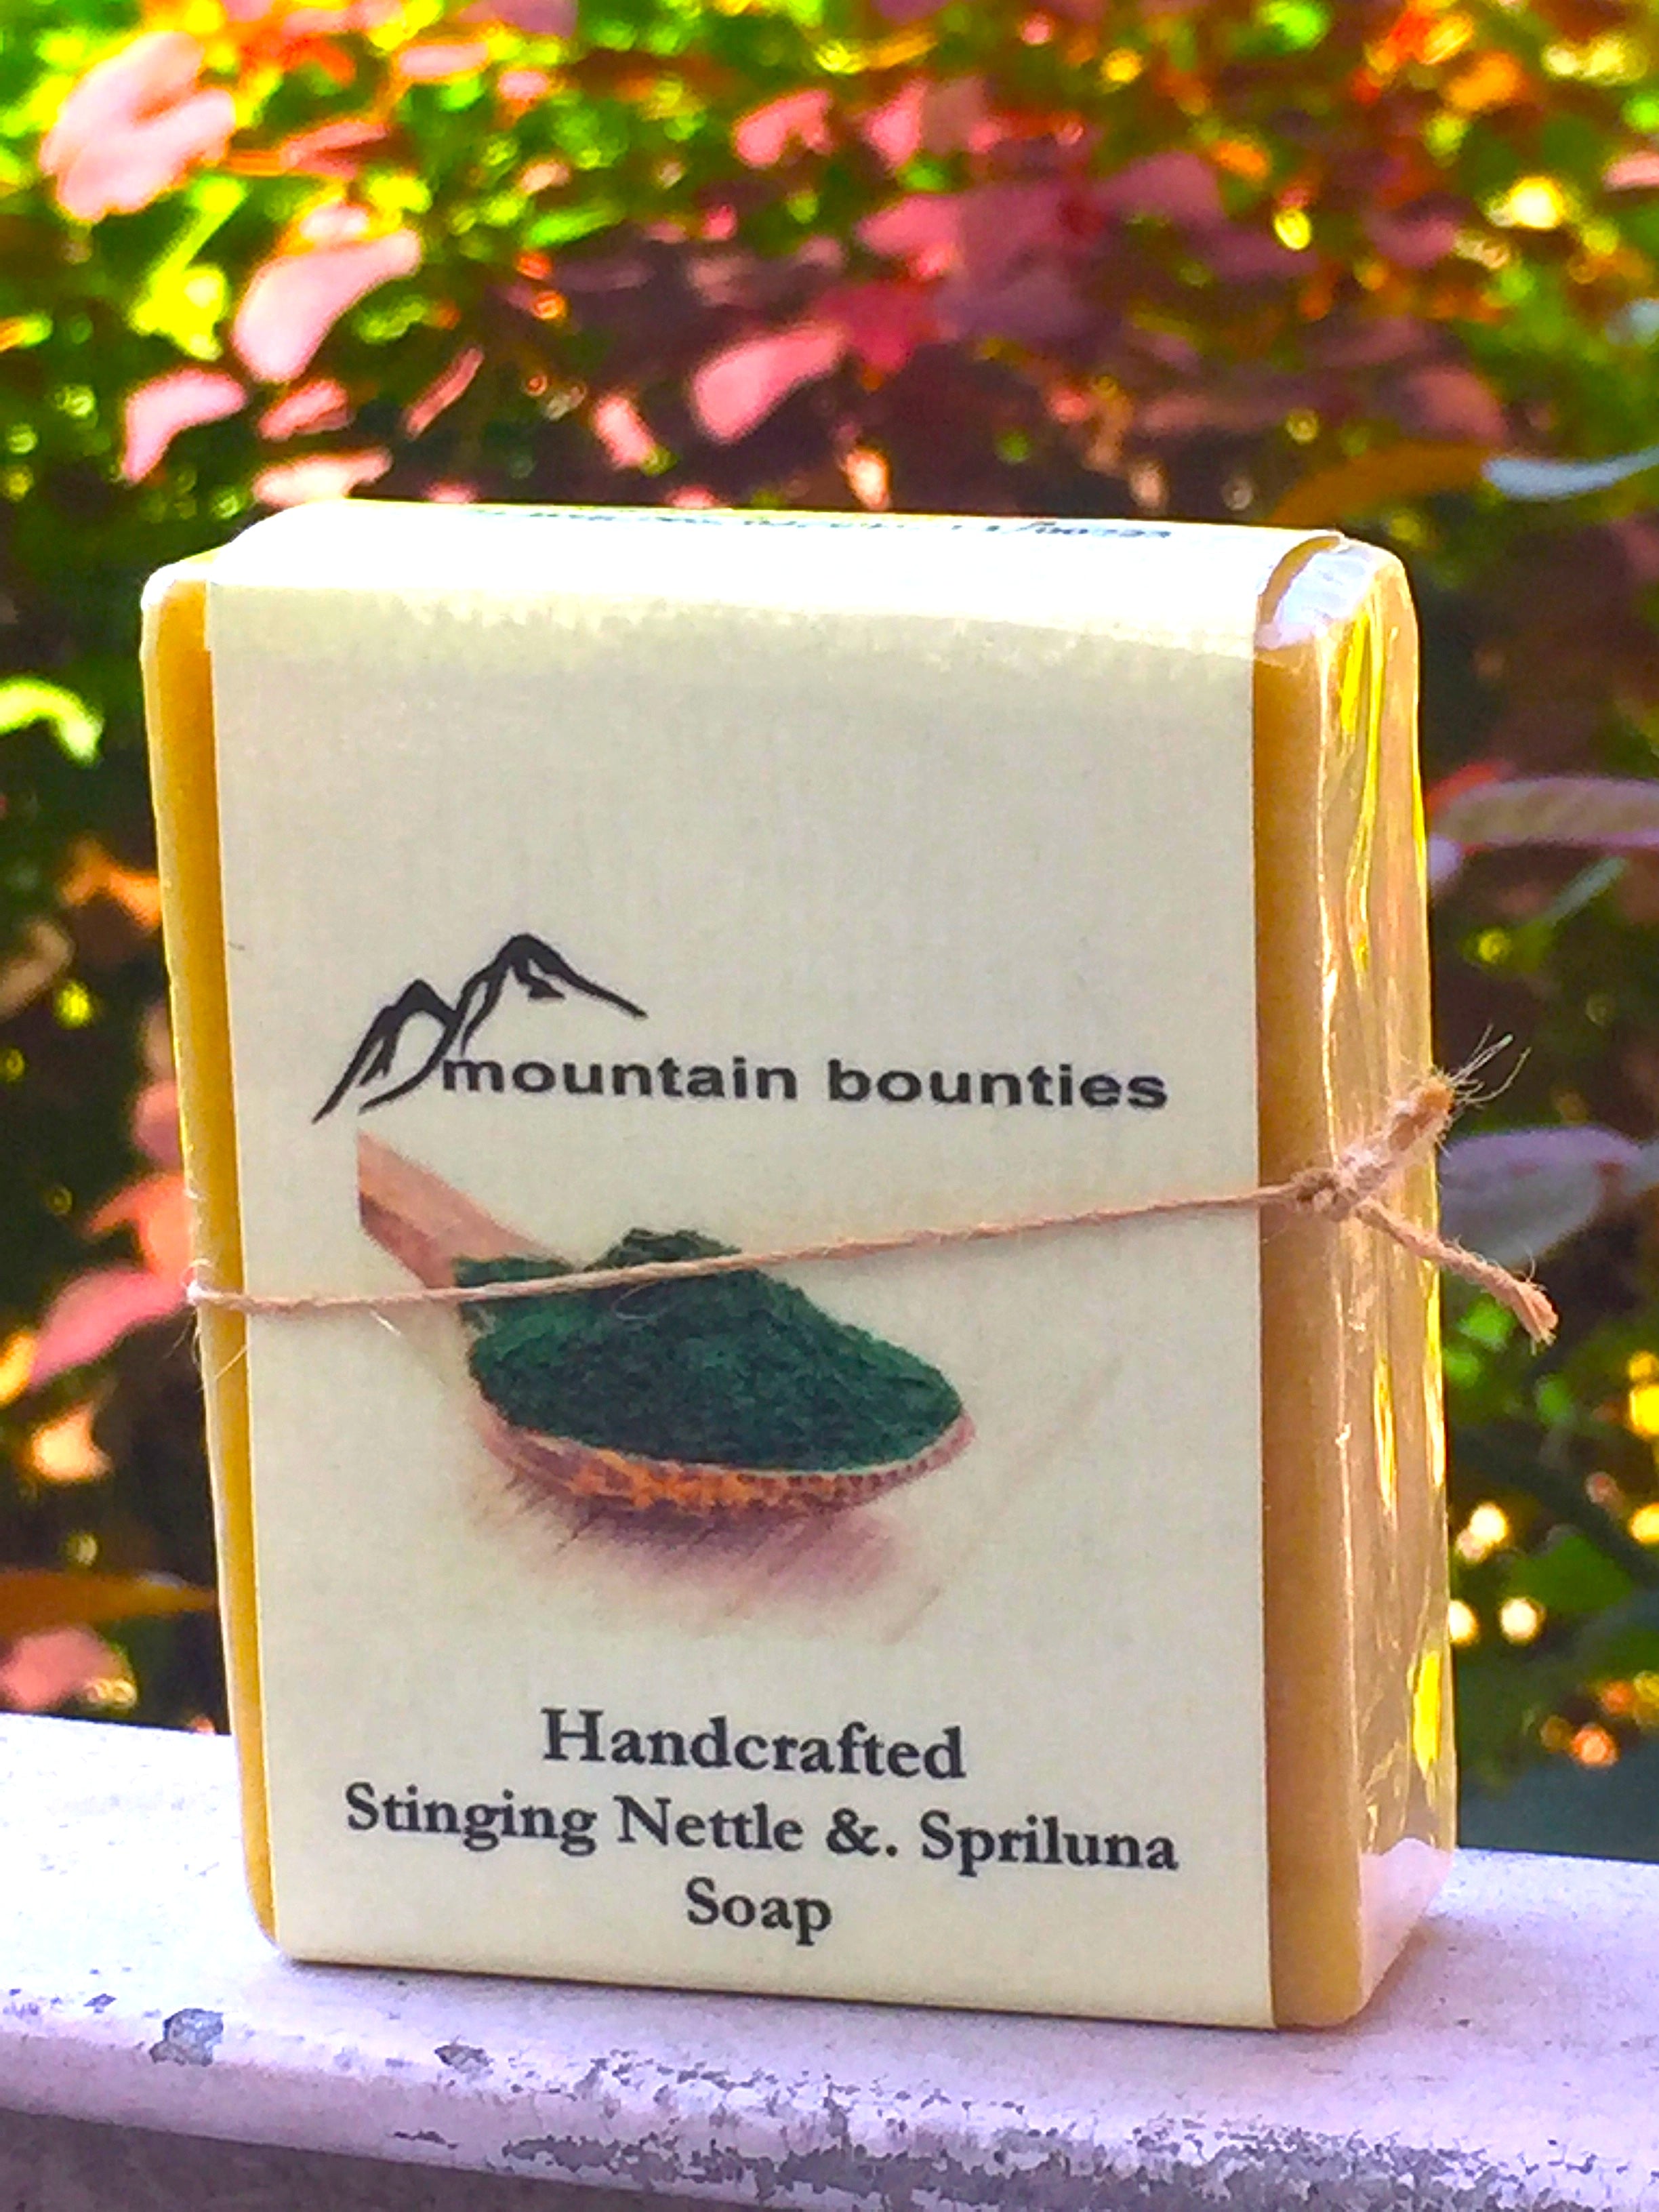 Handmade Stinging Nettle & Spirulina Soap, handmade cold pressed, 100% natural, 100% Handmade, Cold Pressed, herbal soap, cold pressed, Handmade, 100% Natural, Moisturising for face, hands and hair, Recommended for prematurely aged skin, sensitive, inflamed and dry skin. Cold pressed, 100% natural, handmade, Natural Skin Care, Natural oils, Skin Care, Himachal Oils, Himalayan Salt, Mountain Bounties, Himalayan people Care